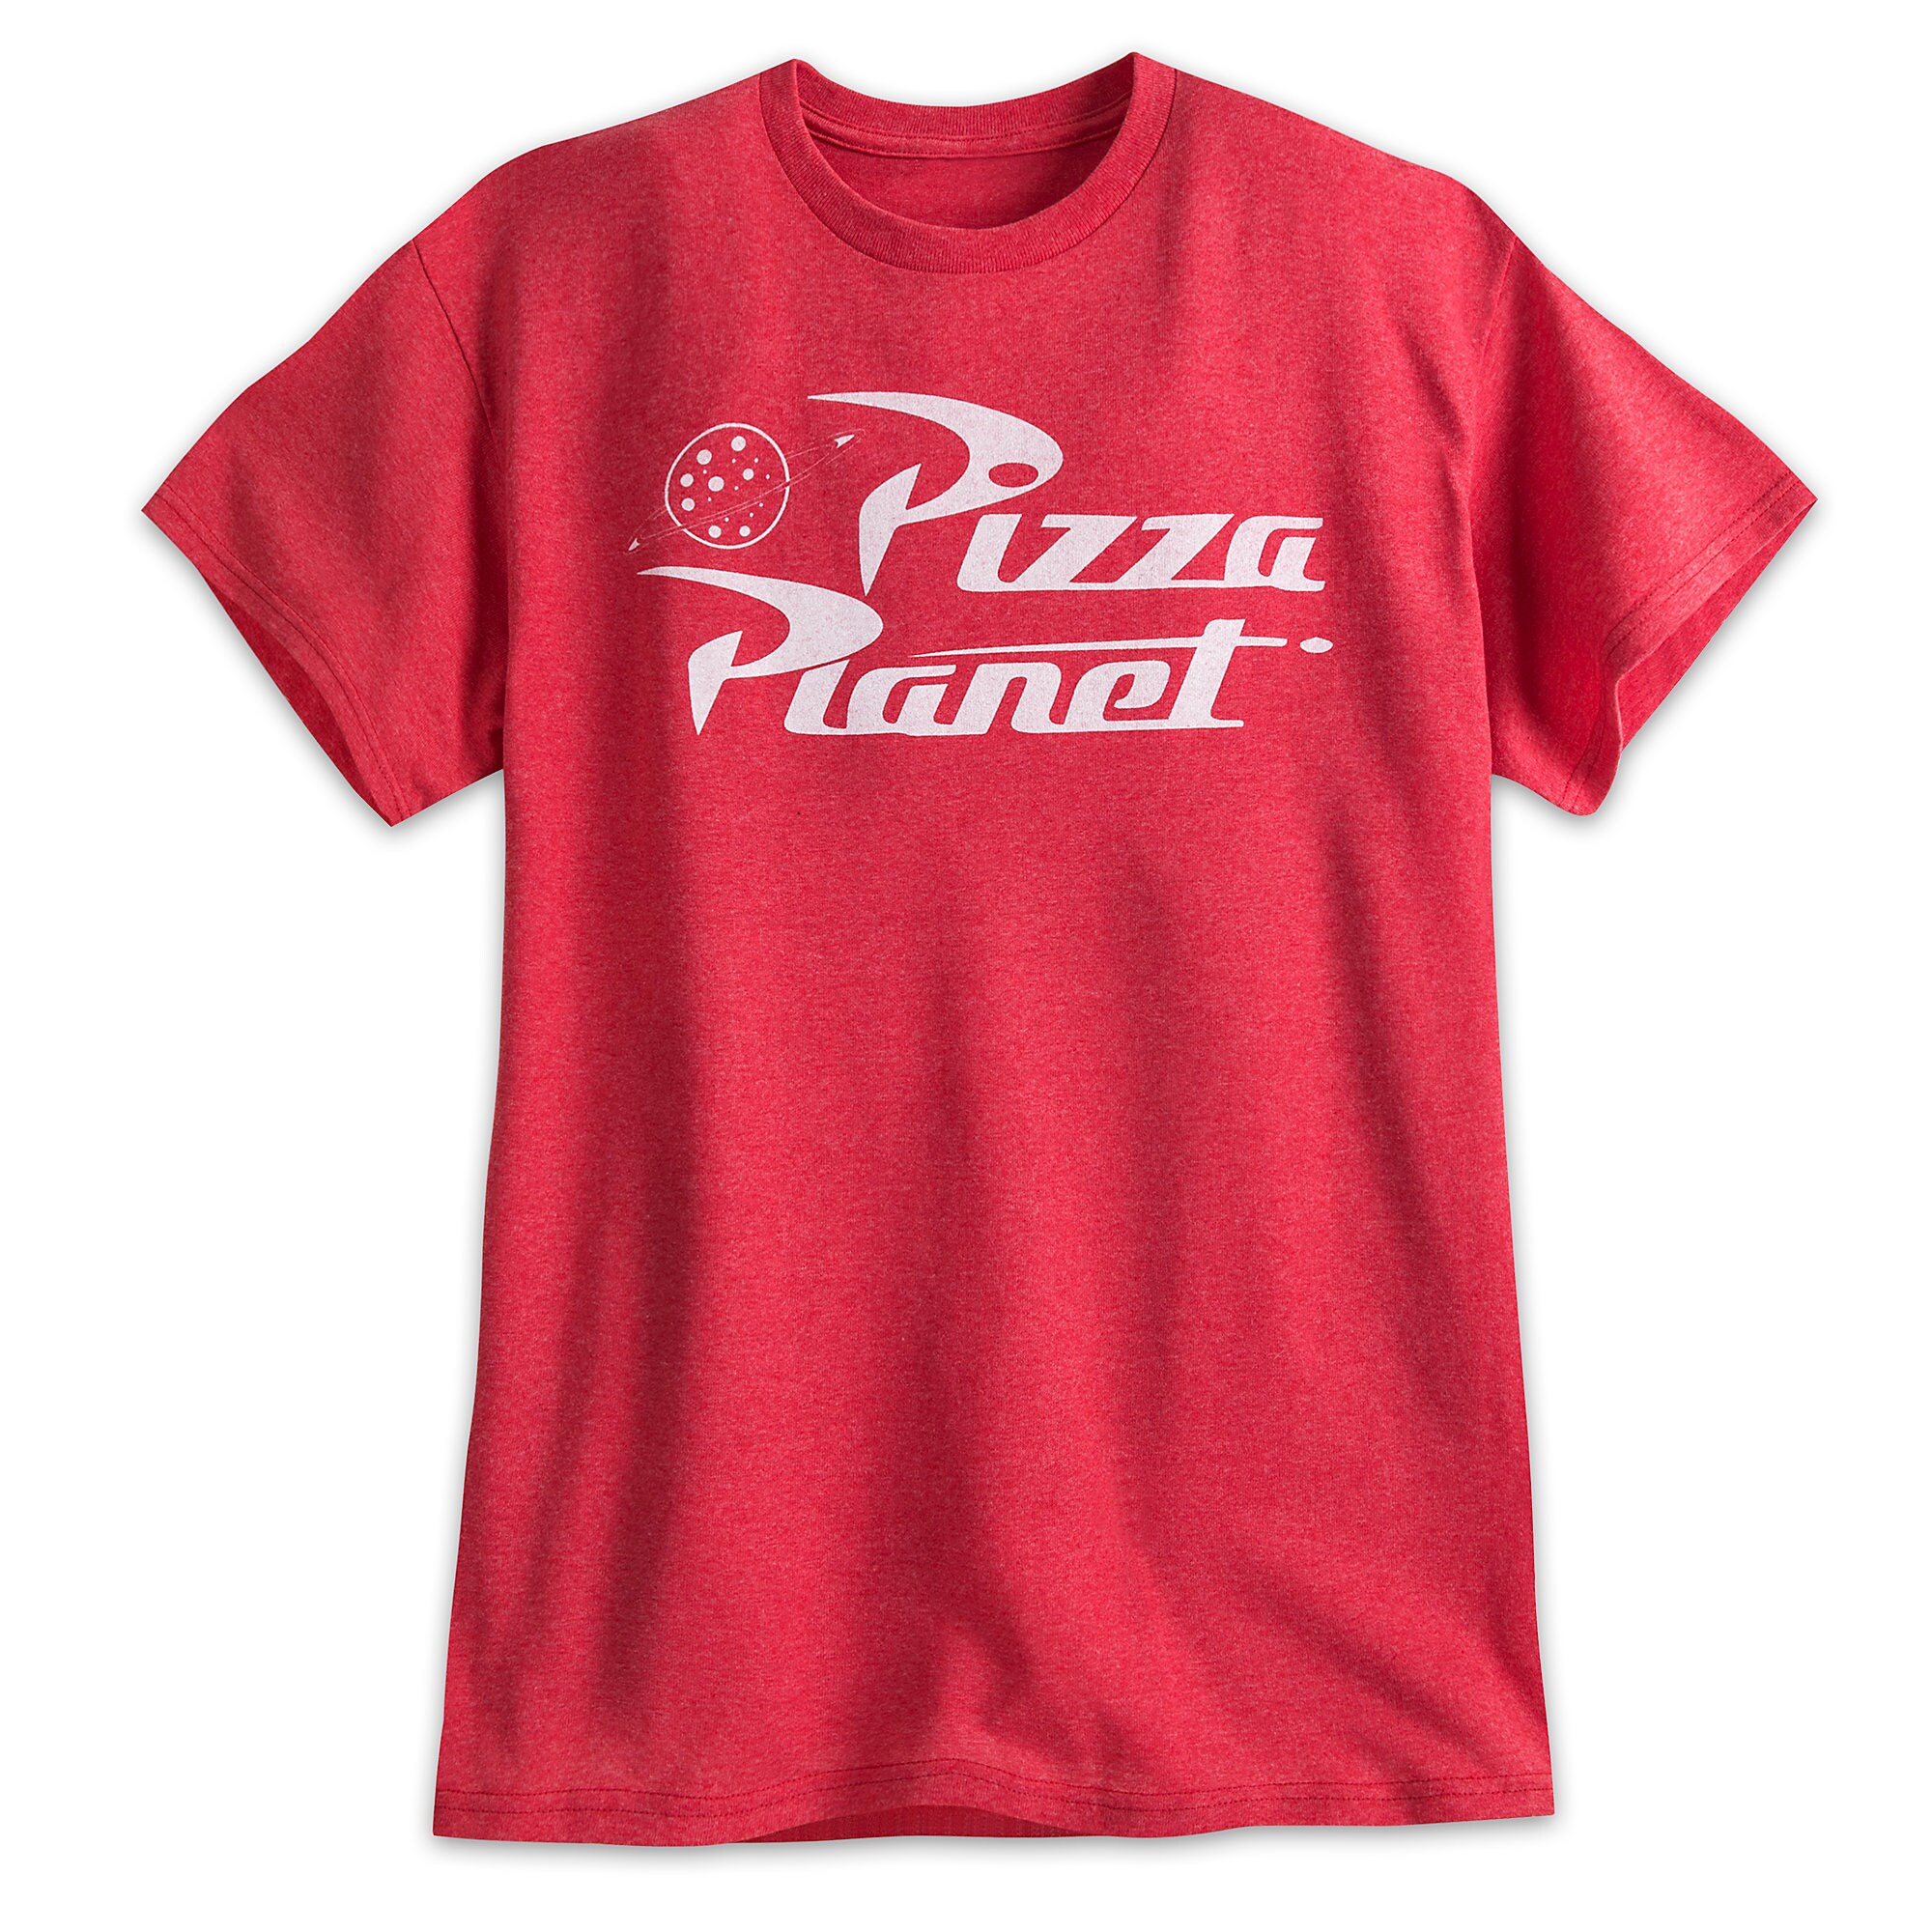 Pizza Planet Logo Tee for Men - Toy Story